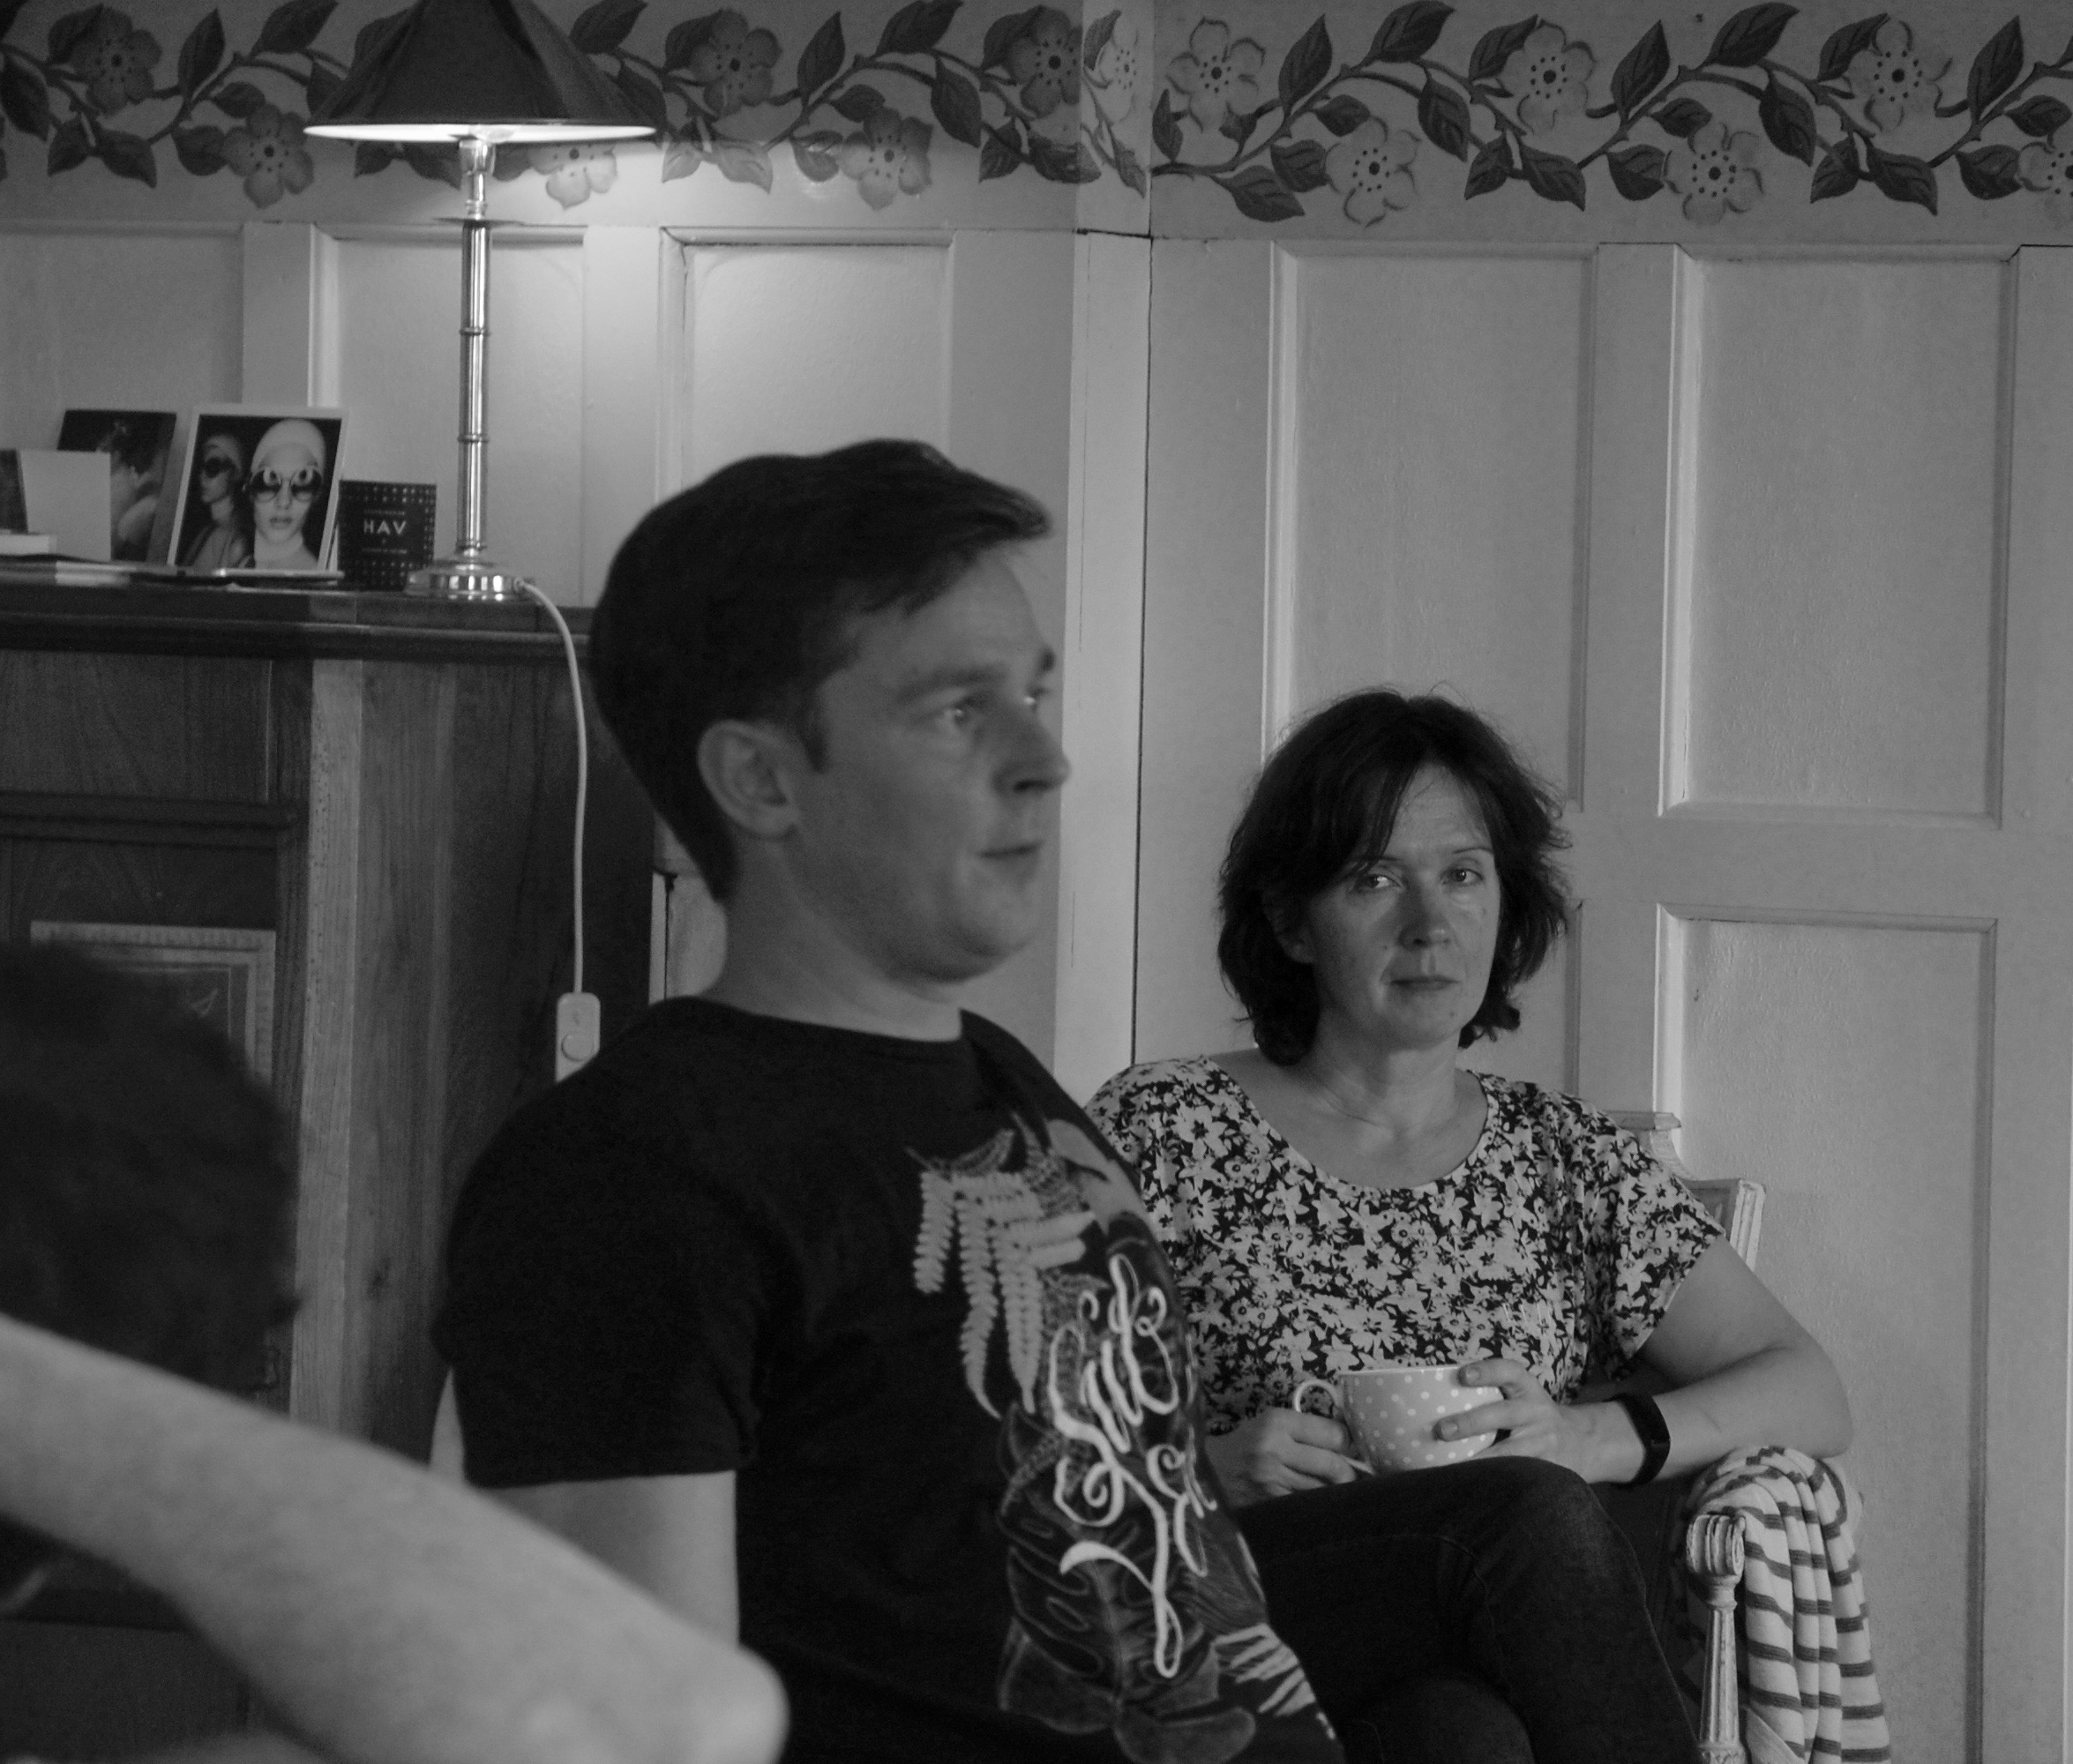 Image 3. Conversation in the living room. Ulrich and Irina. 